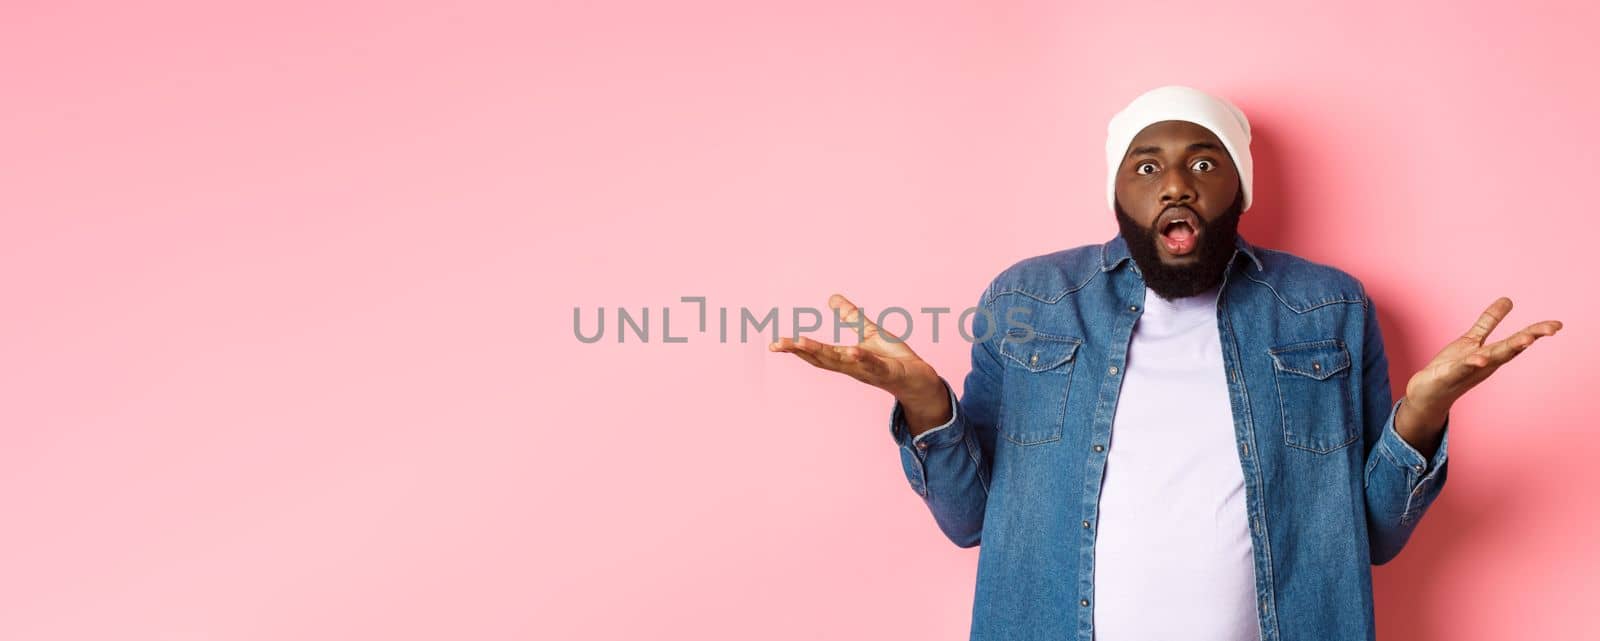 Confused and shocked african american man spread hands sideways and drop jaw, staring with awe and amazement at camera, standing over pink background clueless.